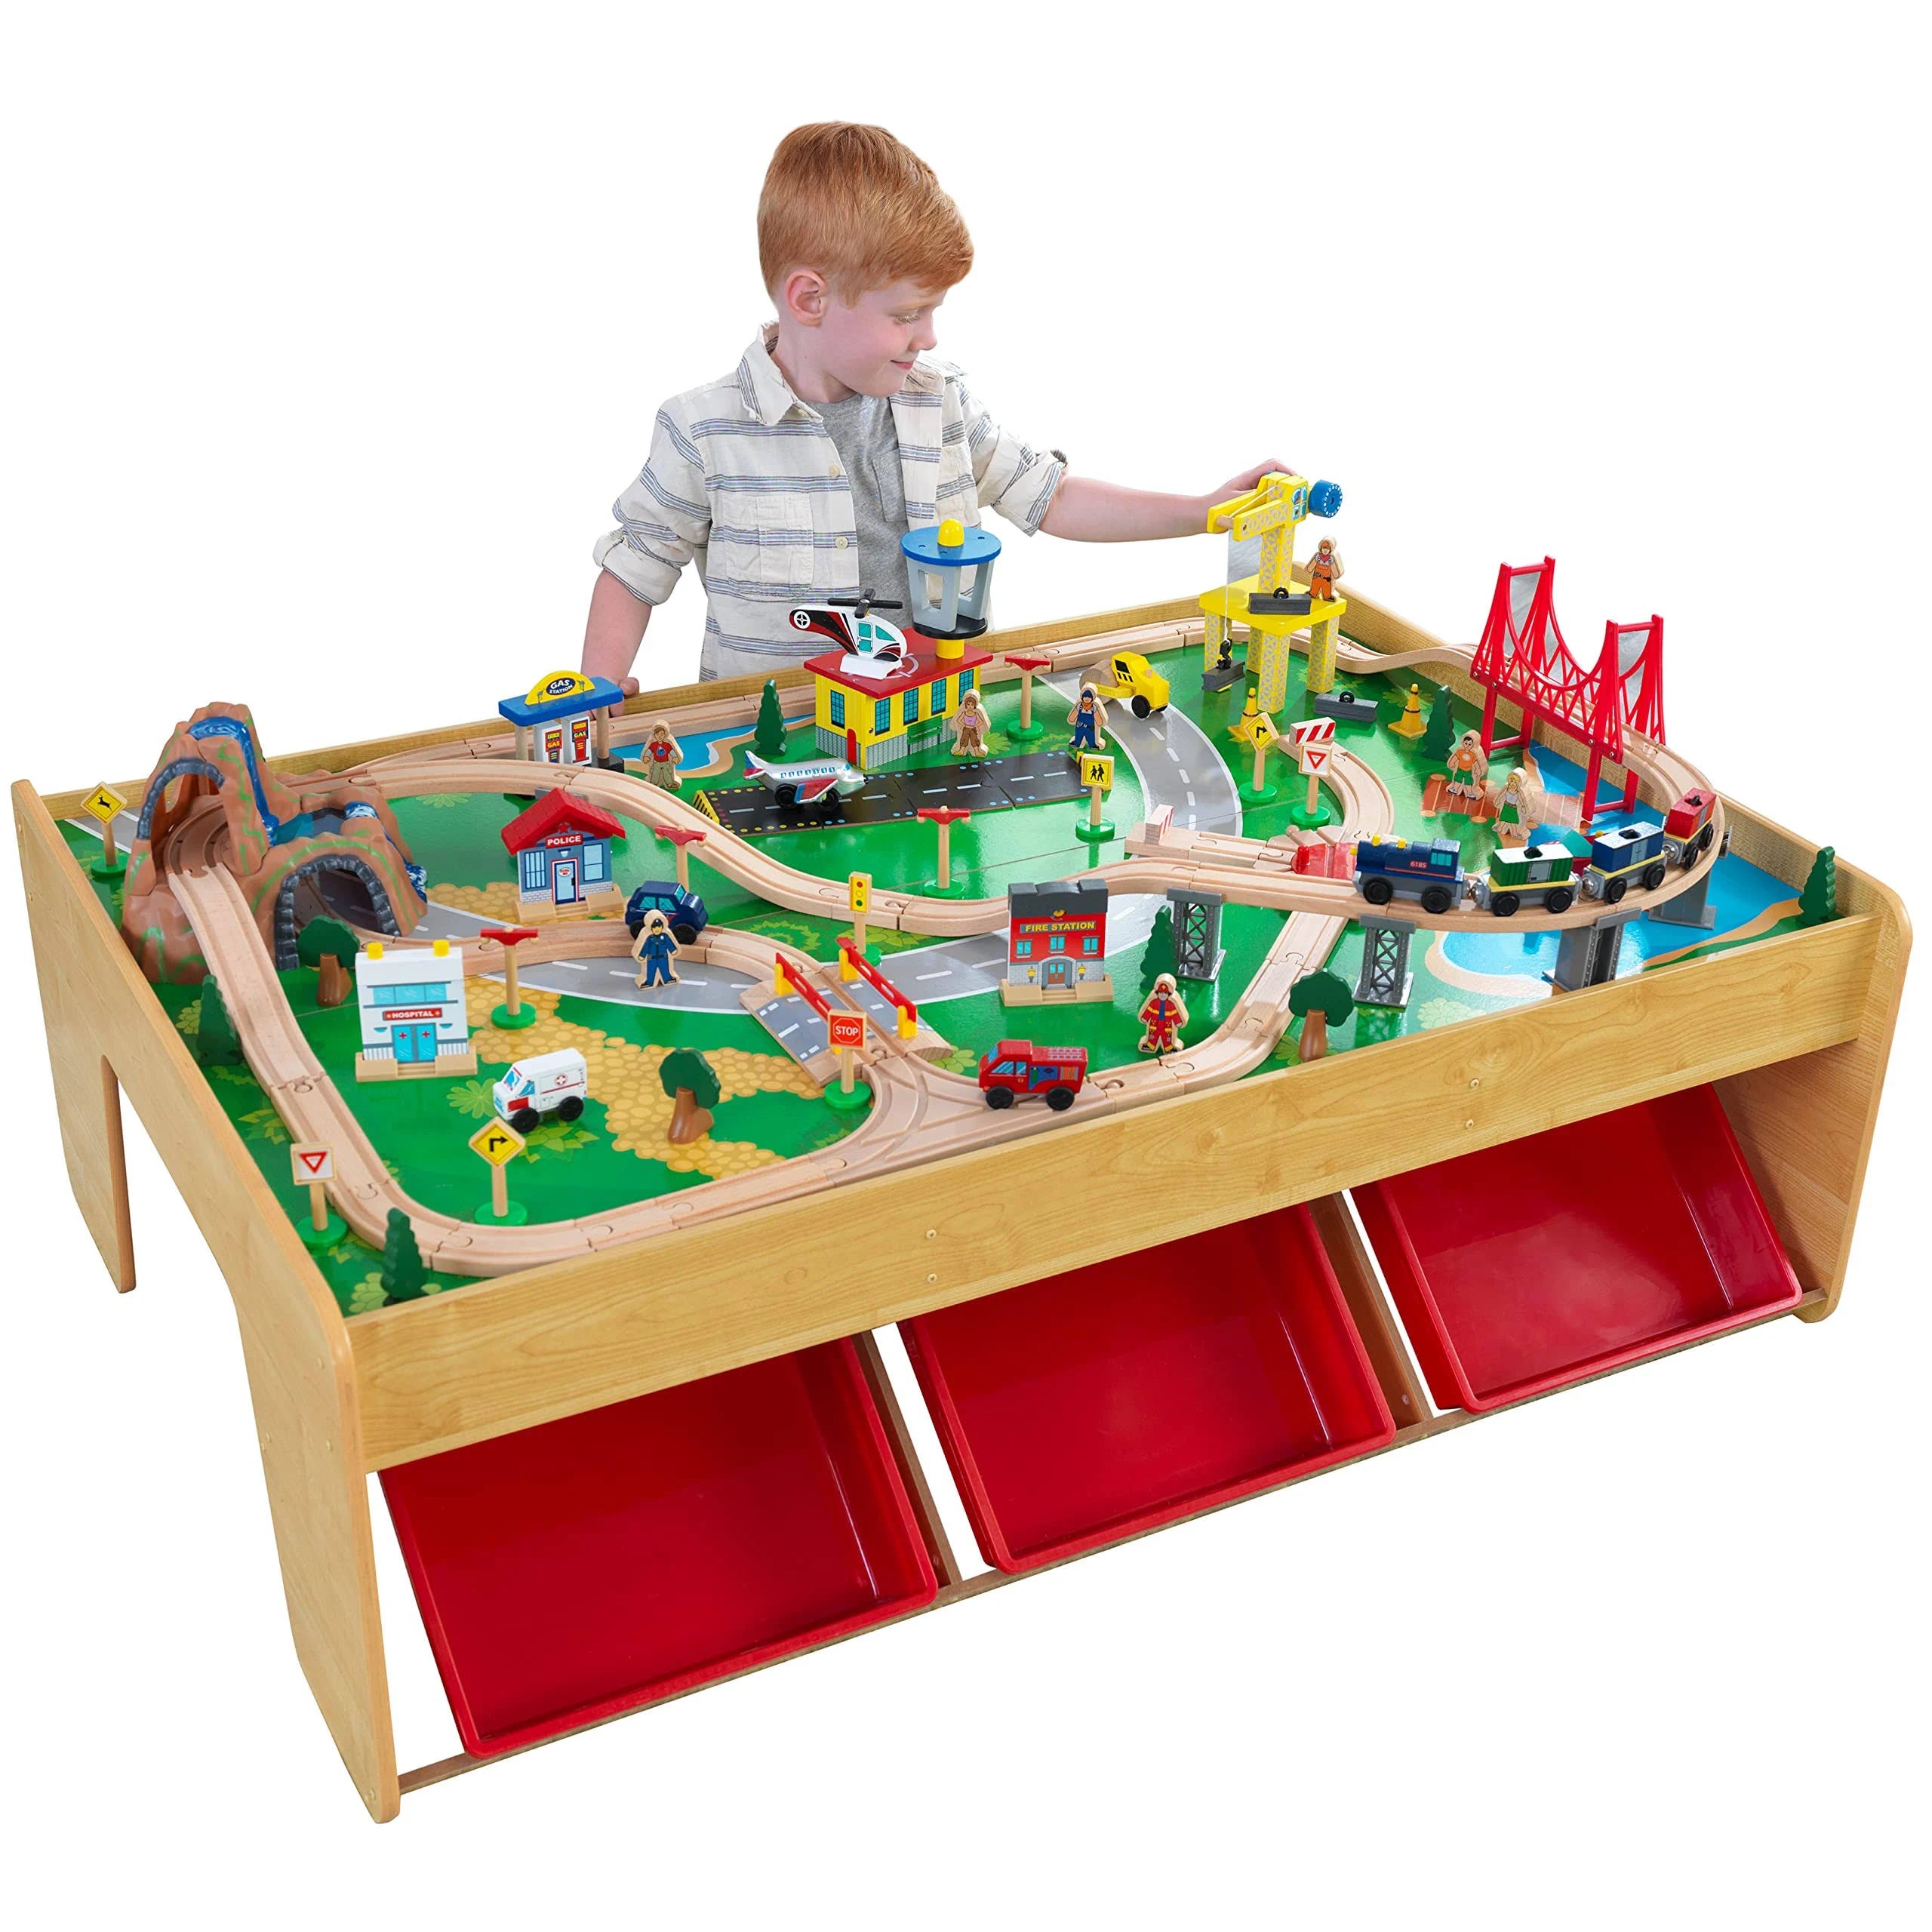 KidKraft Waterfall Mountain Train Set and Table: Durable, Creative Playtime for Kids | Image